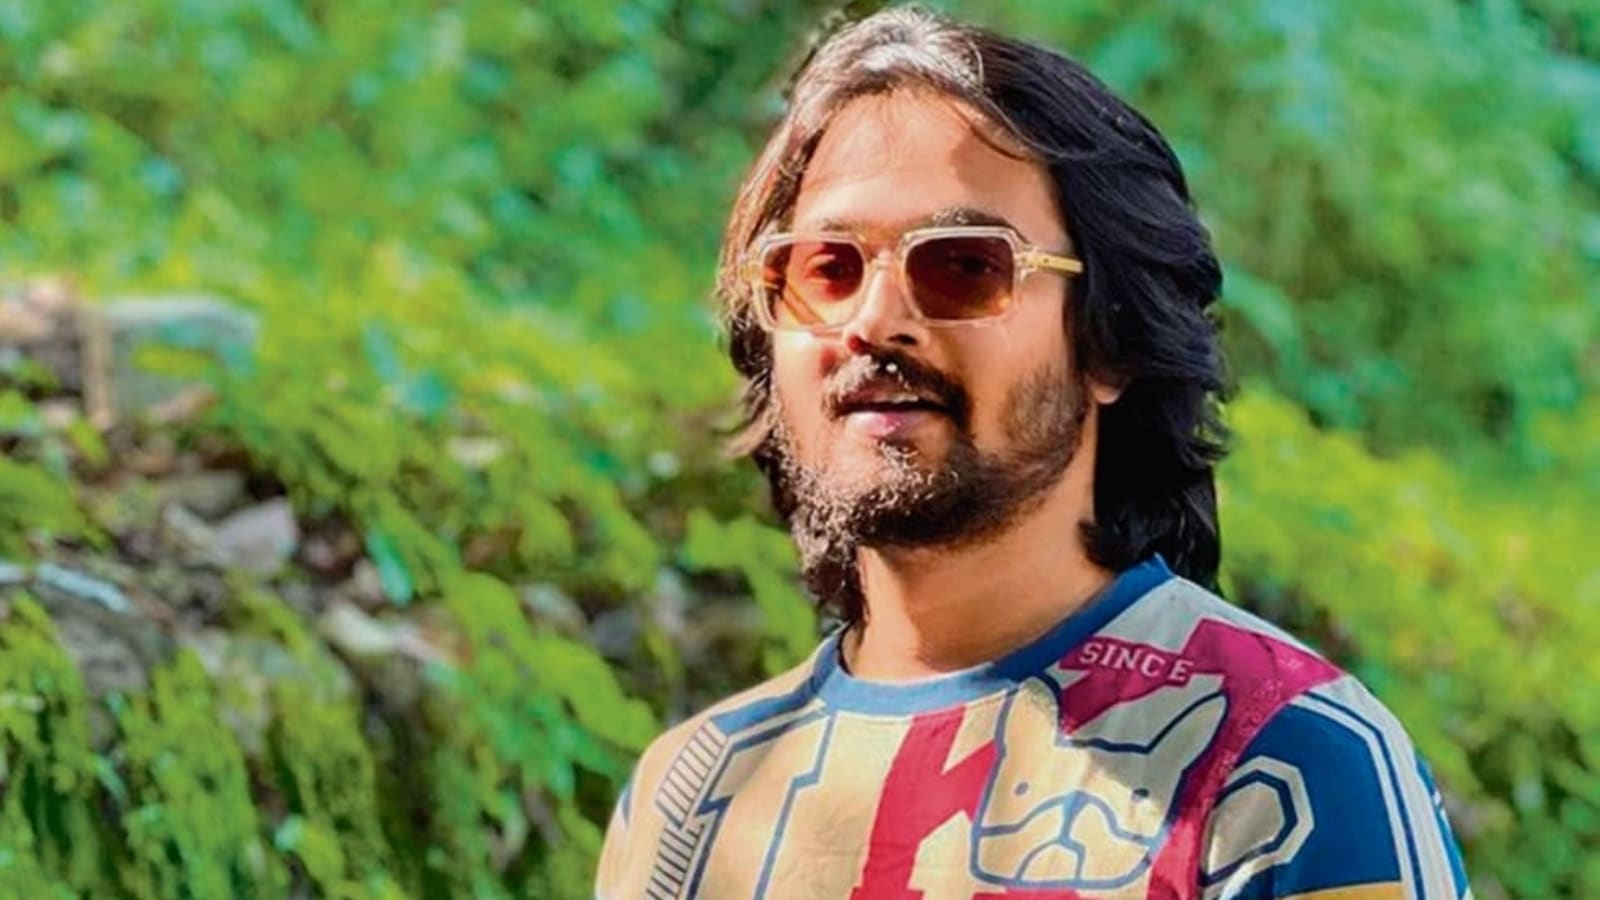 Bhuvan Bam apologises after video draws flak for objectifying, degrading women Web Series